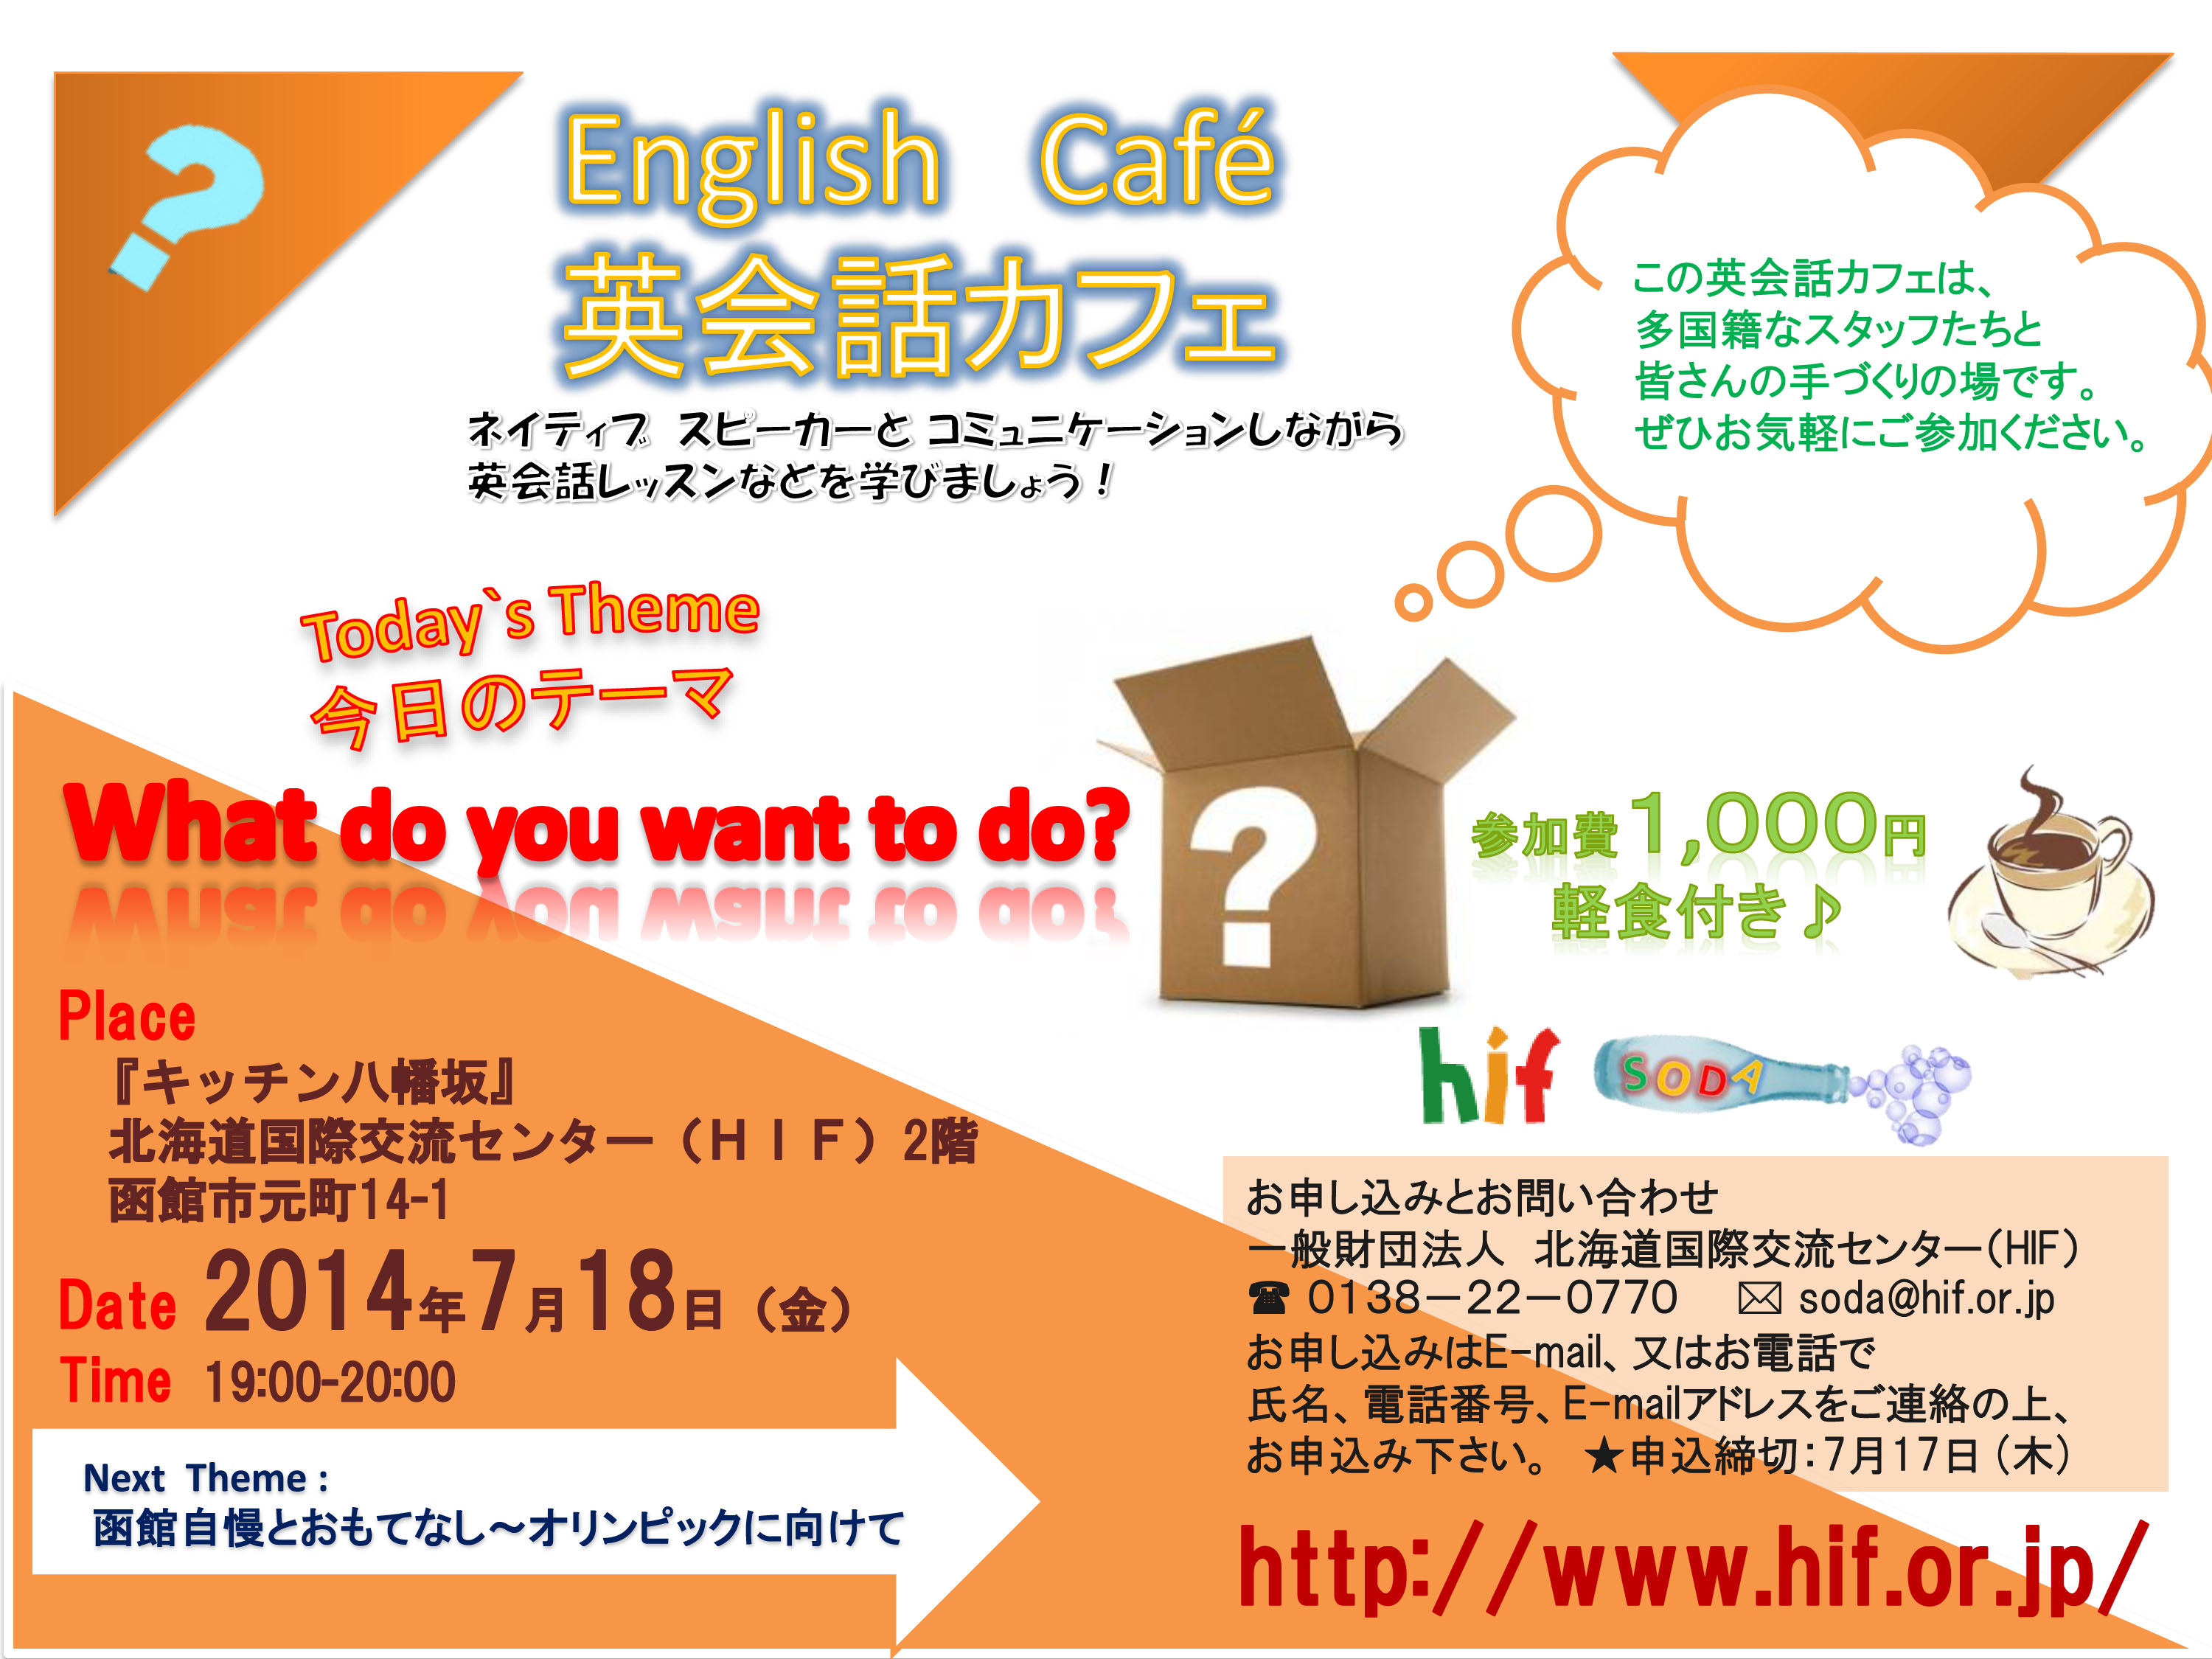 http://www.hif.or.jp/2014/07/11/Int.cafe%20new7.jpg